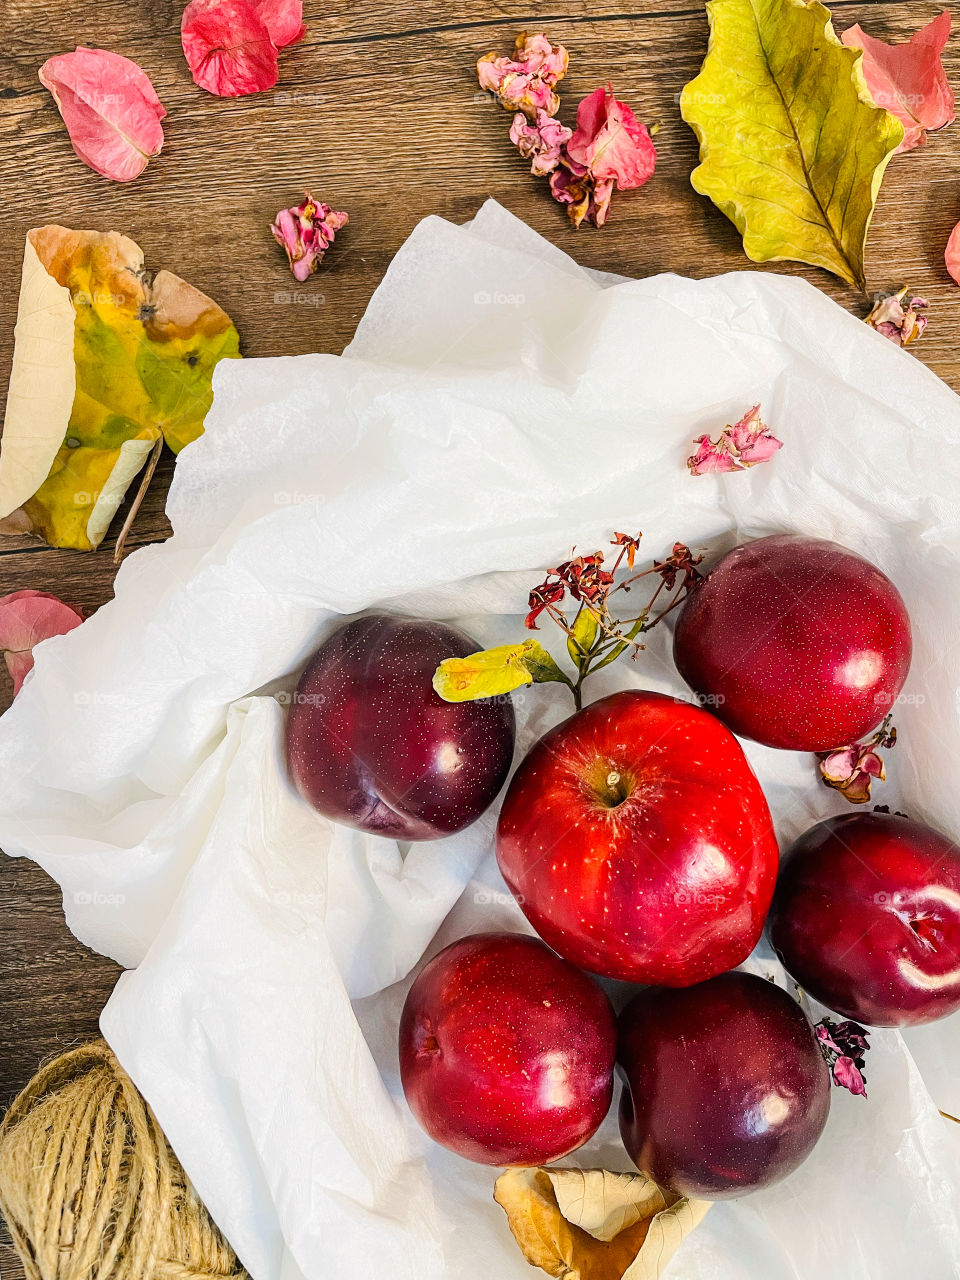 Plums and apple on a white paper and wooden background with dried flowers and leaves .Flat lays 